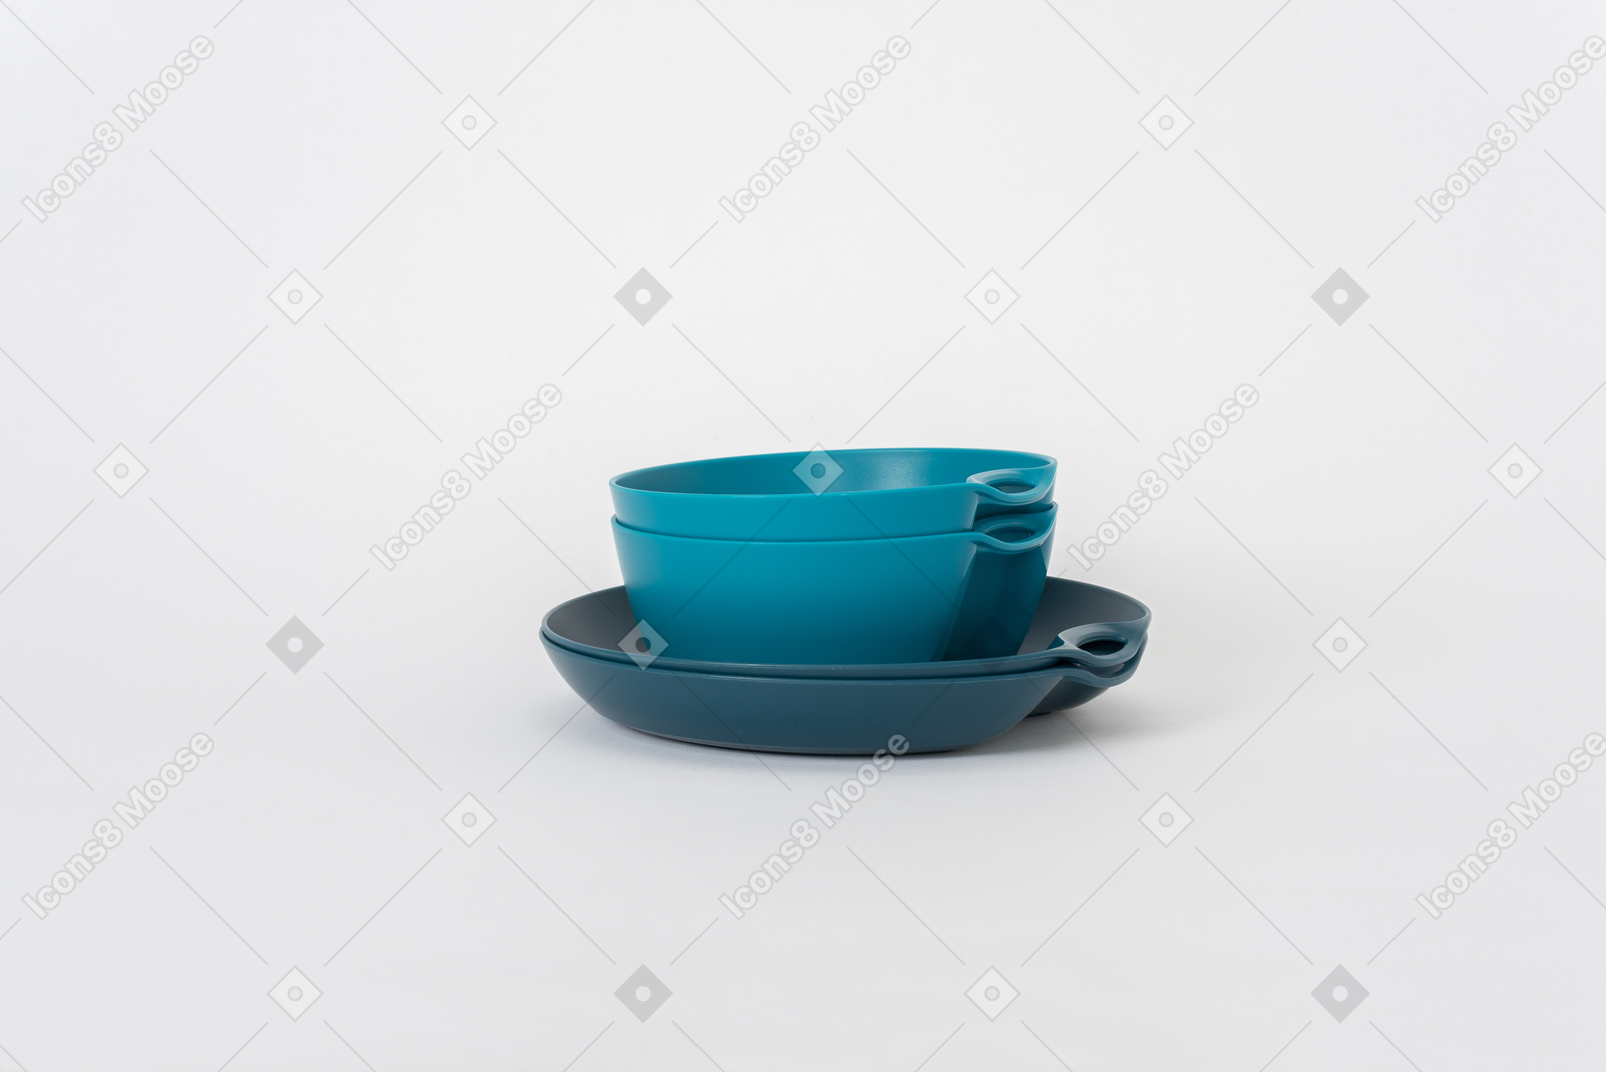 Stack of plastic tableware on a white background